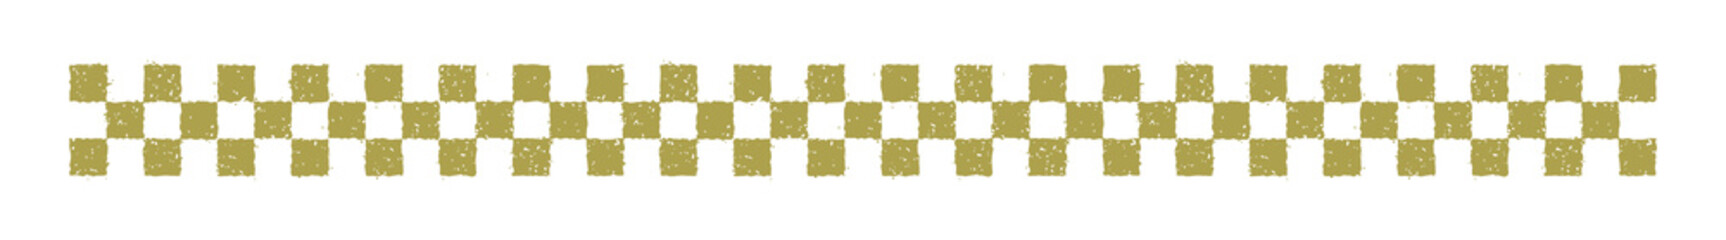 Grunge gold tiles bar / separator line. Japanese traditional pattern / for new year's greeting card design.